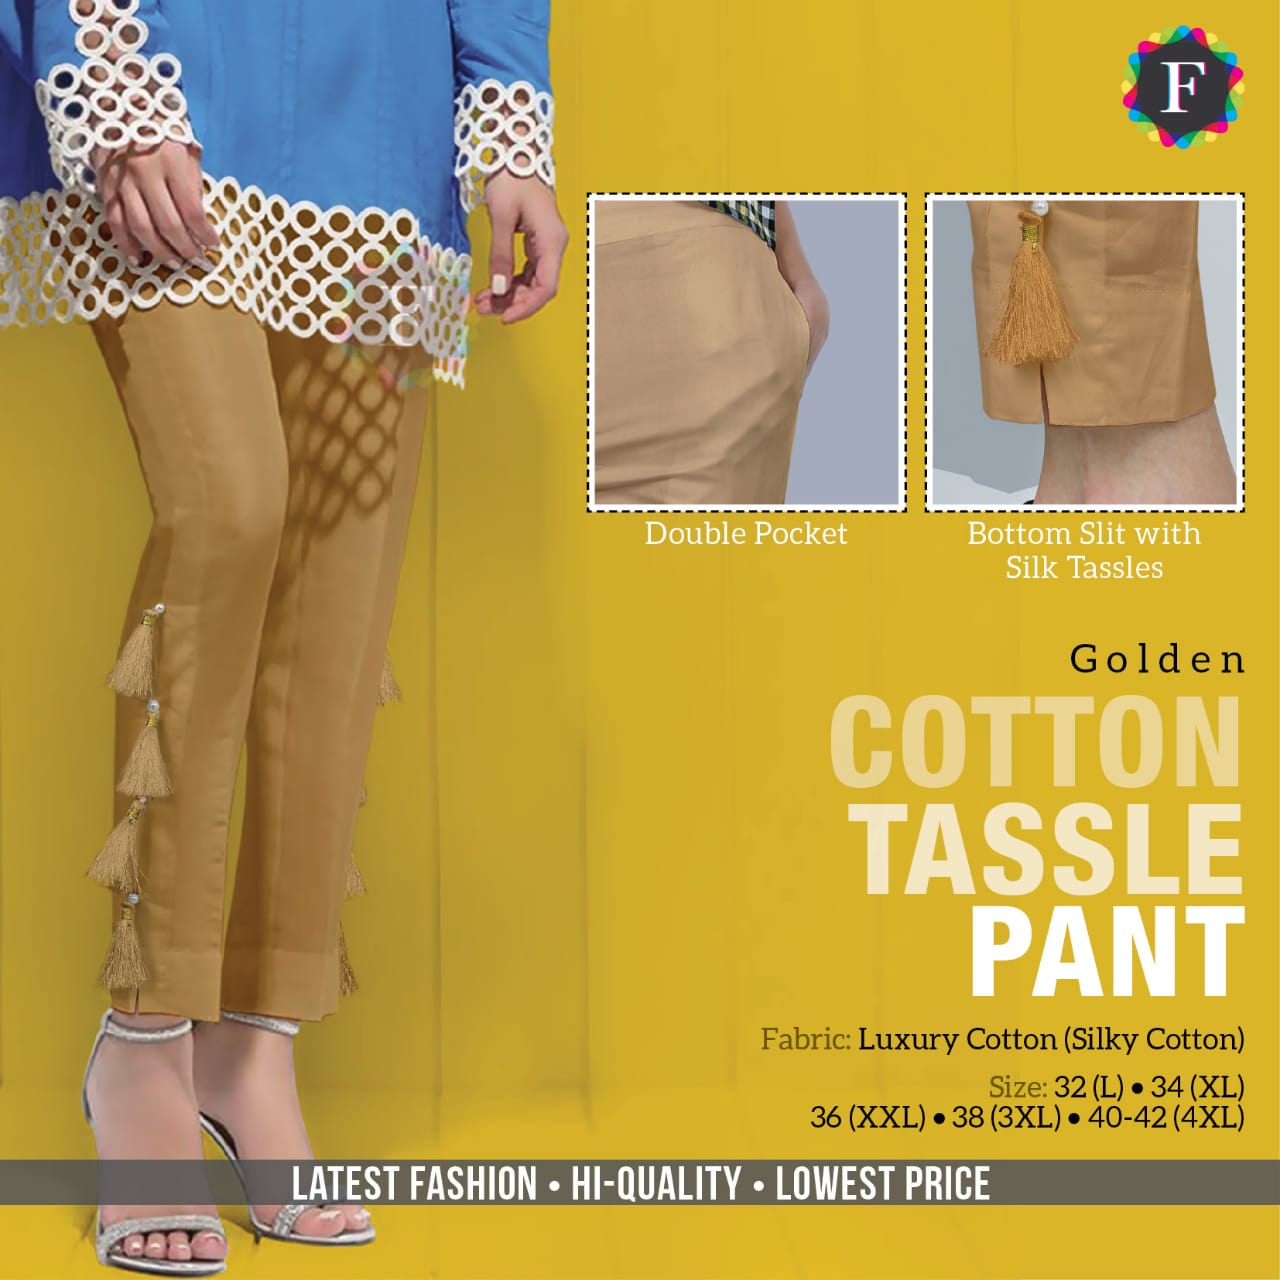 Tassle Pant Cotton Ladies Bottom Wear Collection At Competitive Prices